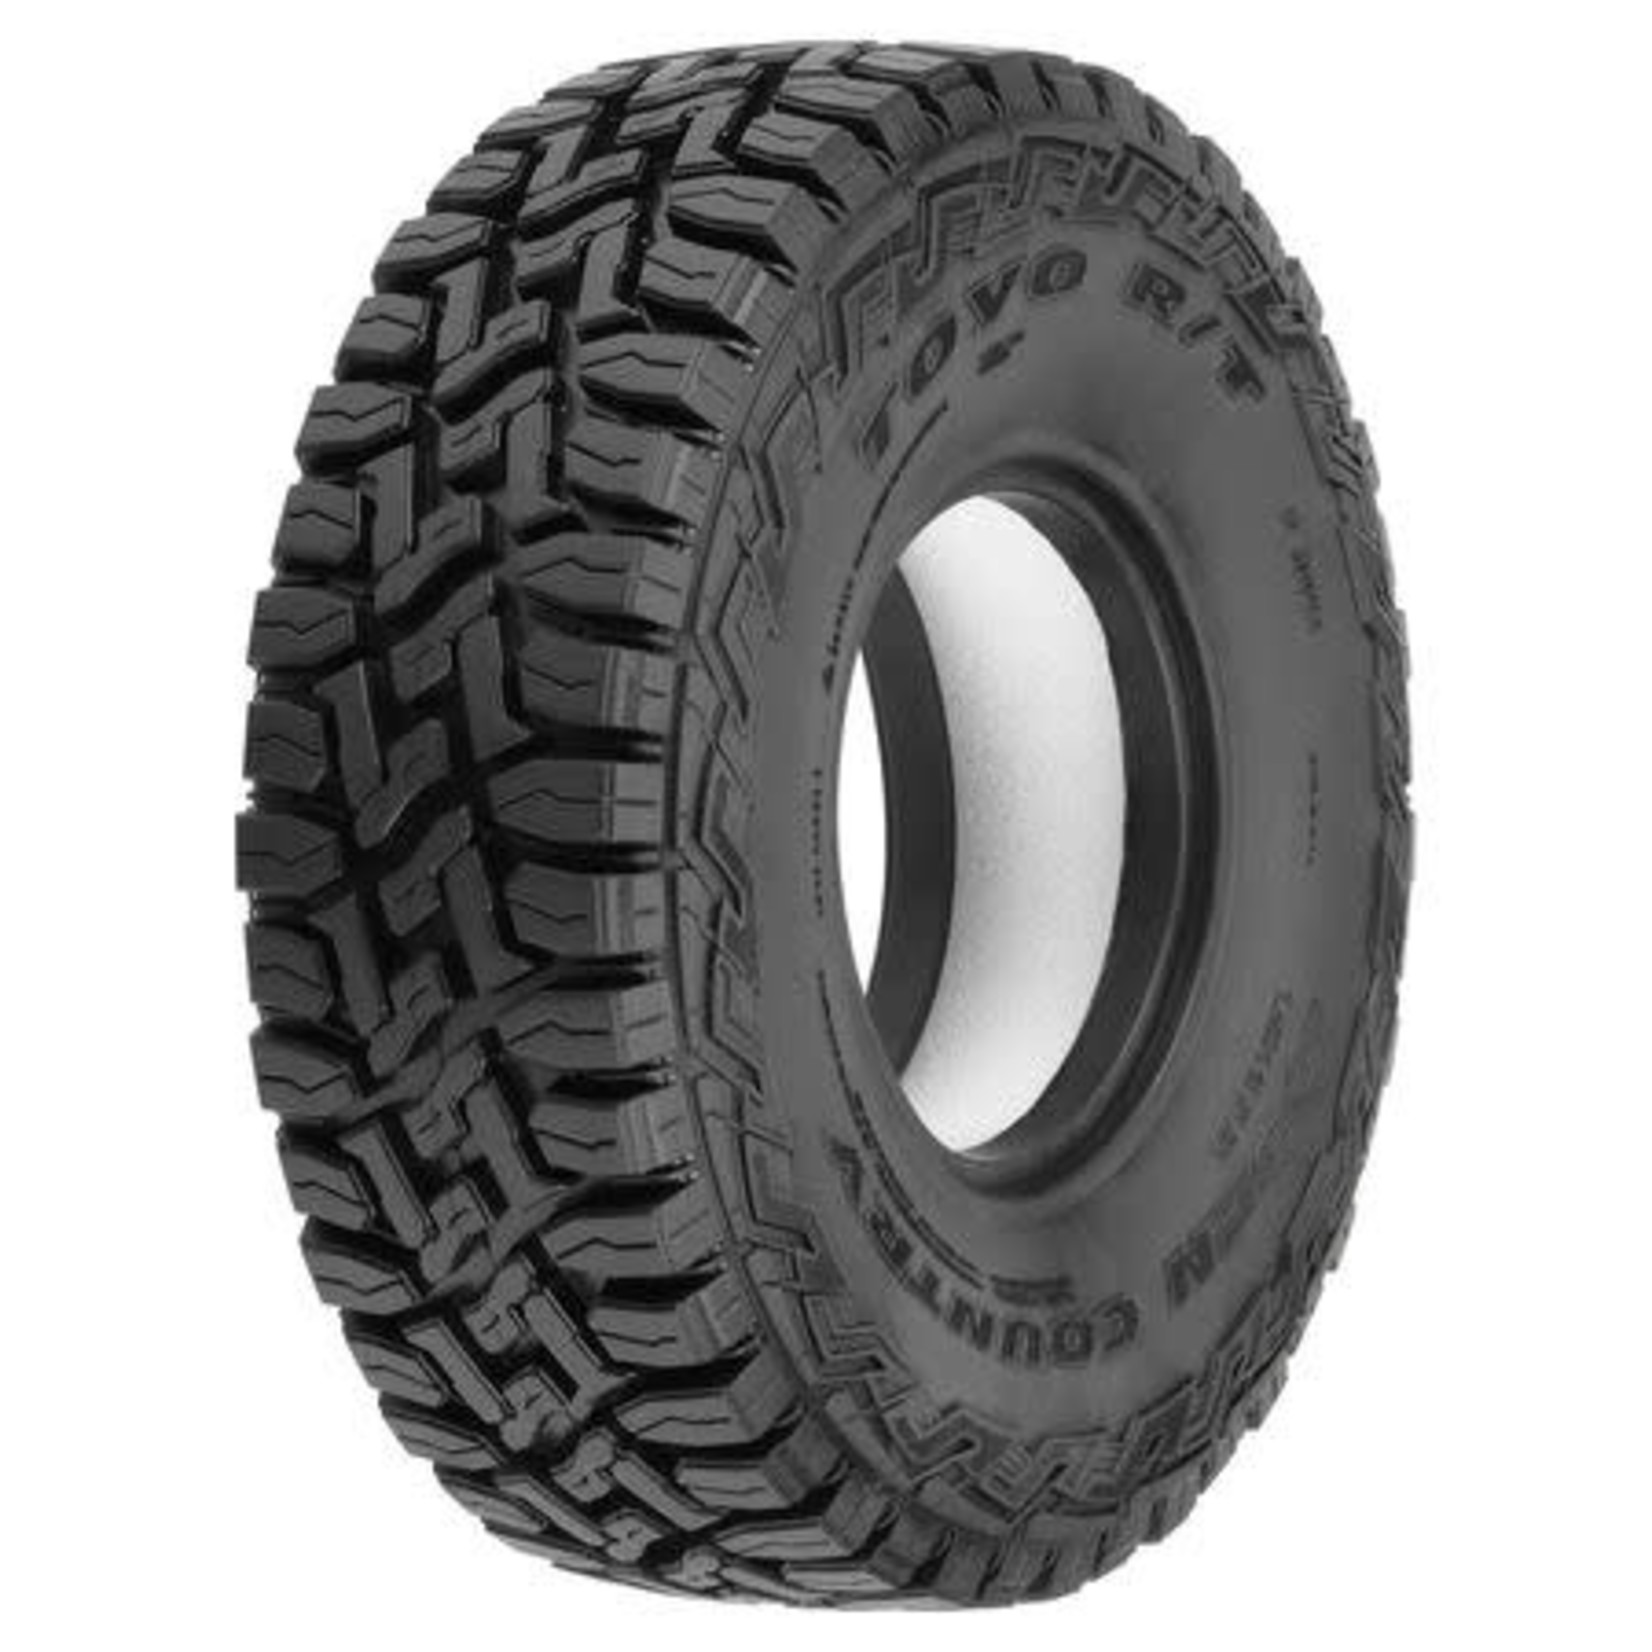 Pro-Line Racing 1.9 Toyo Open Country RTG8 Fr/Rr Tires (2)